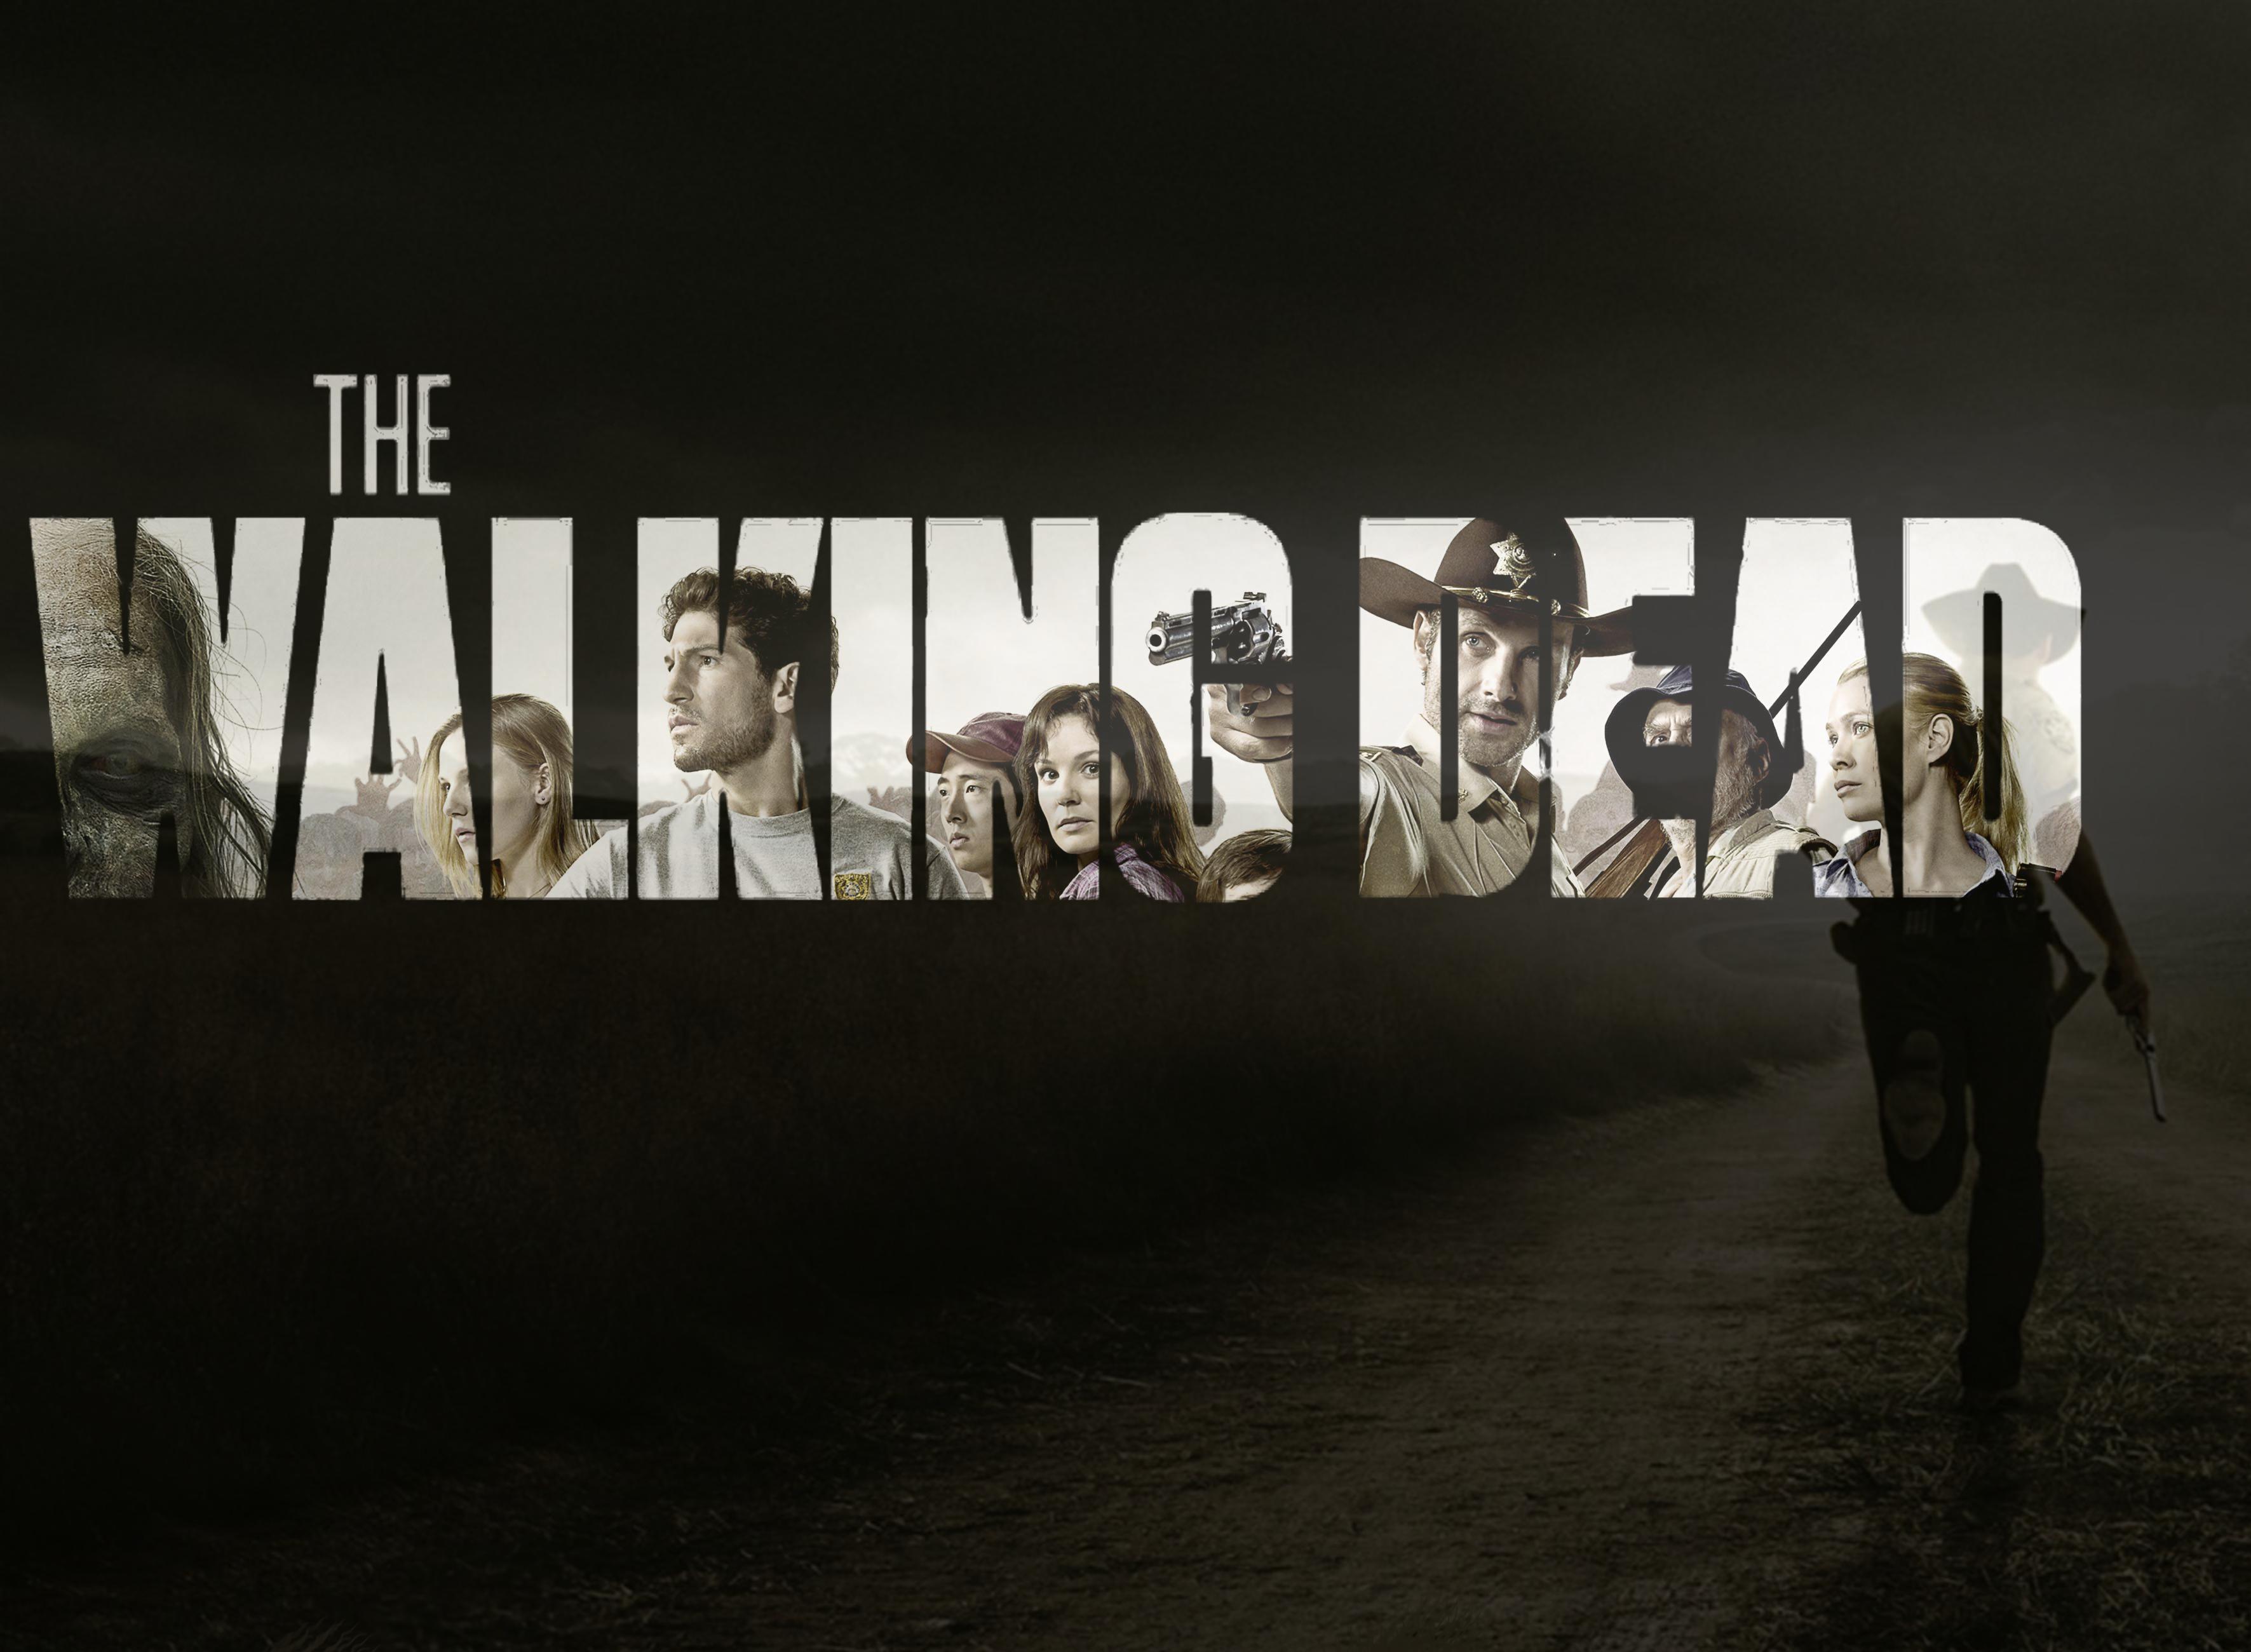 My friend requested a walking dead wallpaper so I delivered